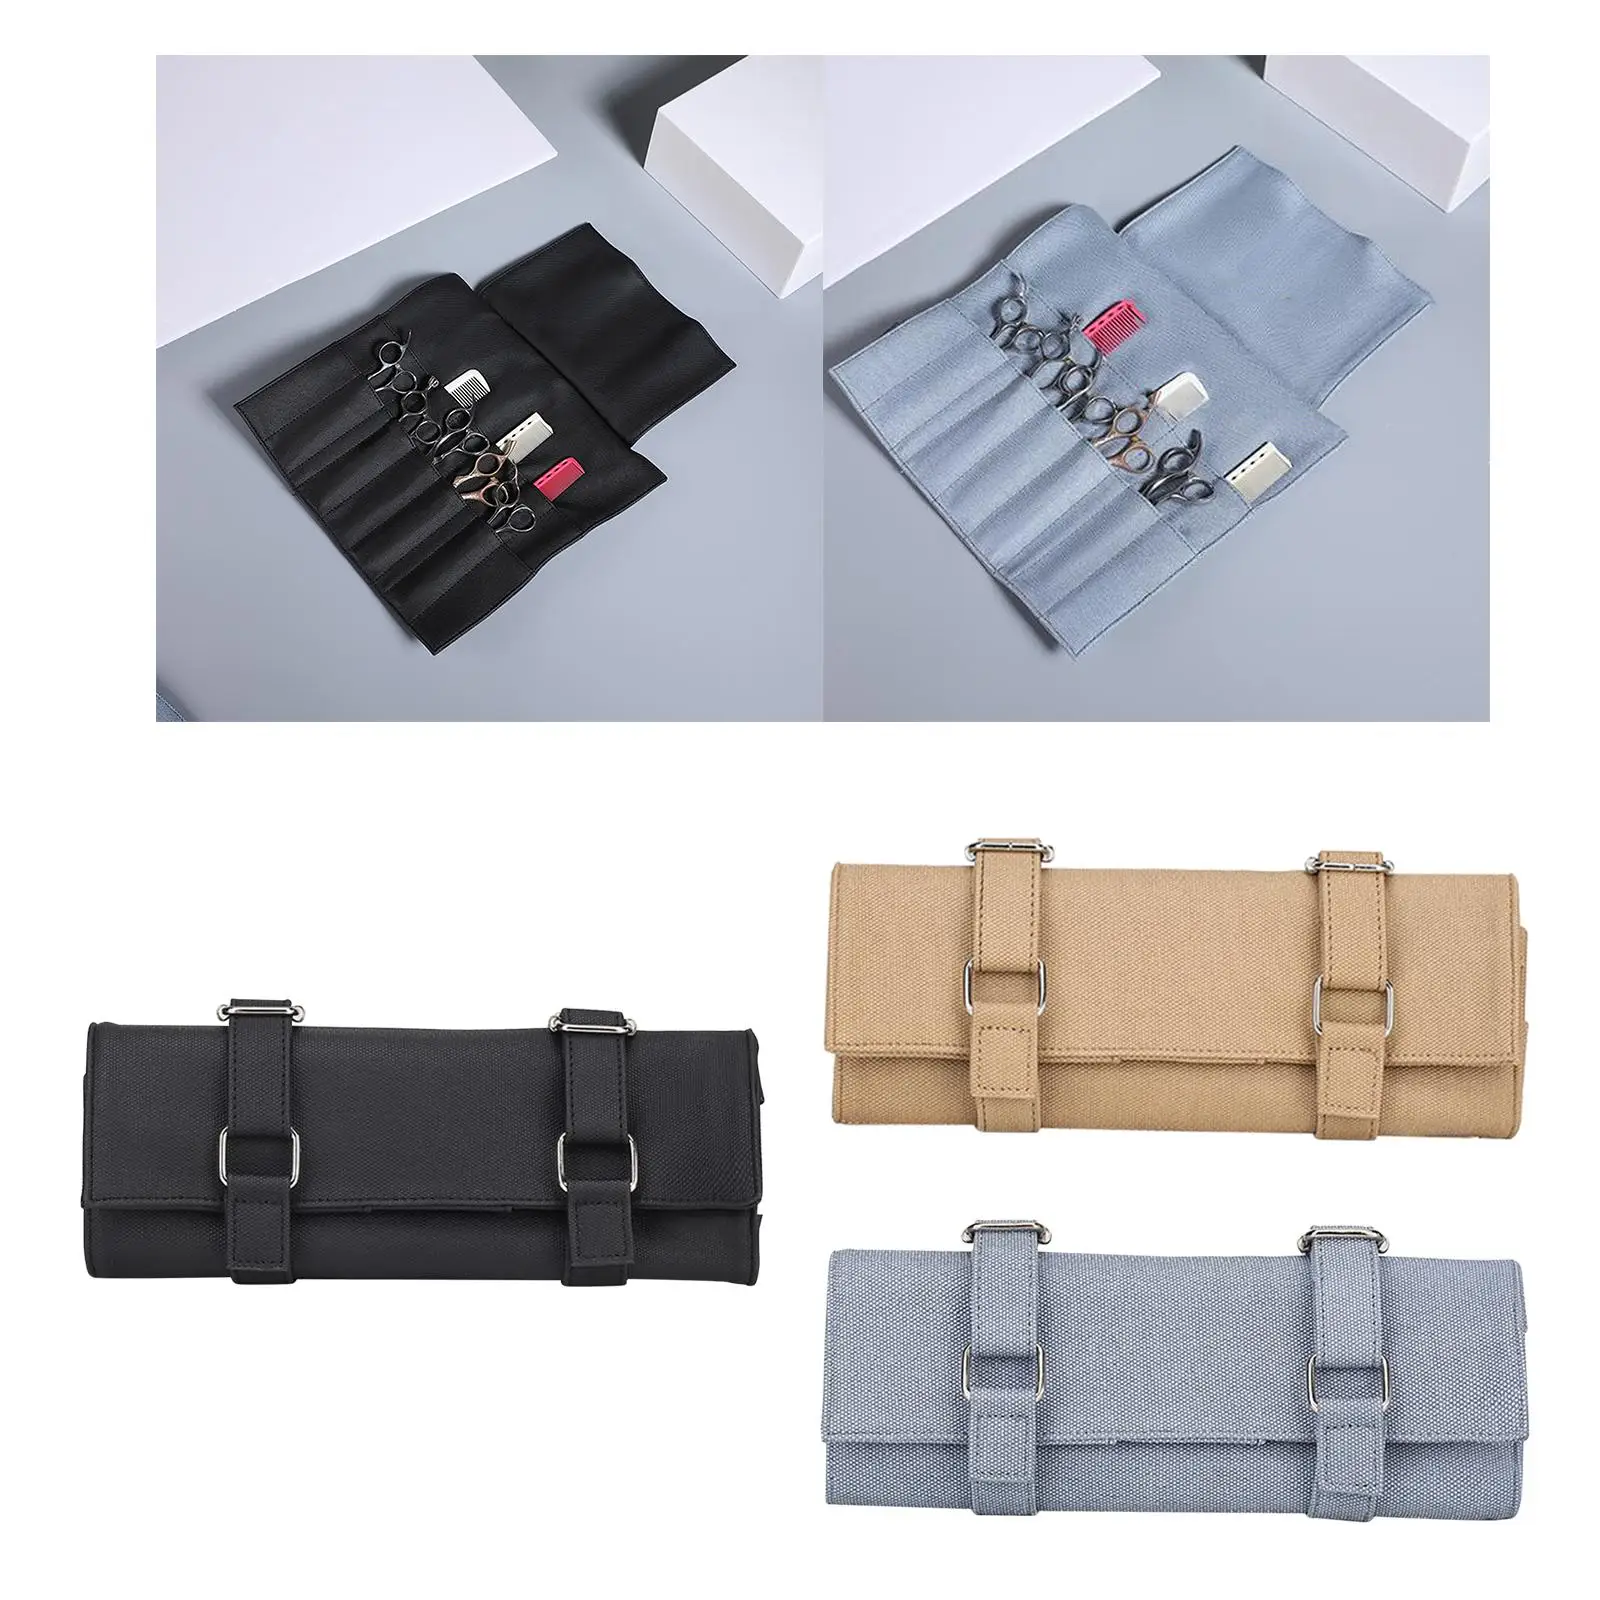 10 Pockets  Shear Holder Pouch Salon Tools Bag for Hairdressers Roll Up Organizer Waterproof Wear Resistant Pouch Cases